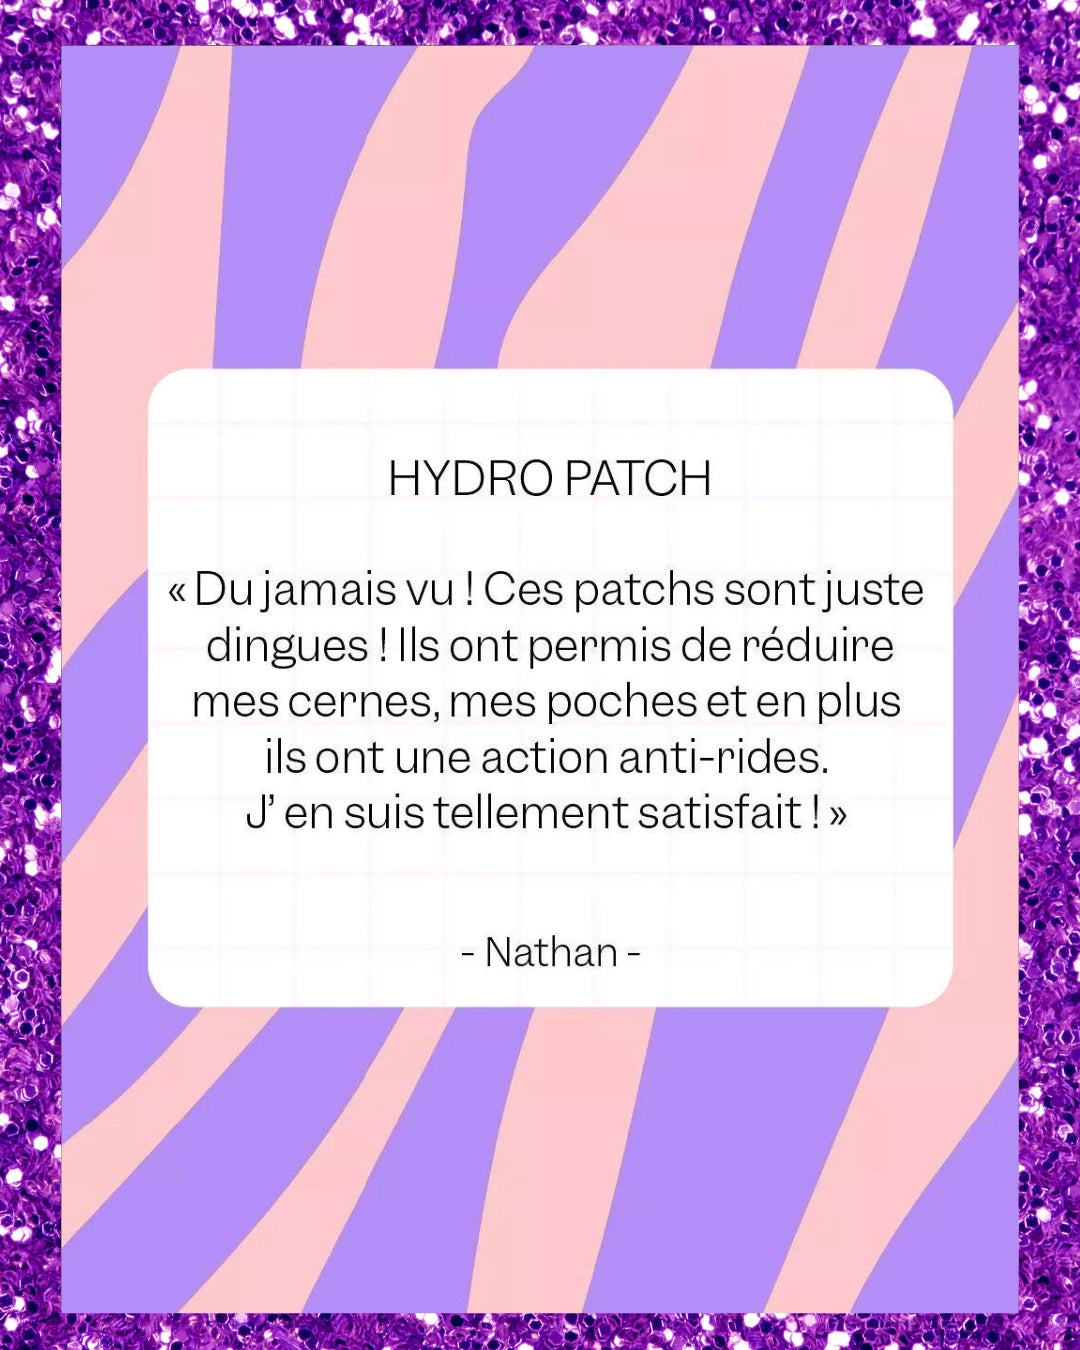 HYDRO PATCH - Patchs yeux hydrogel